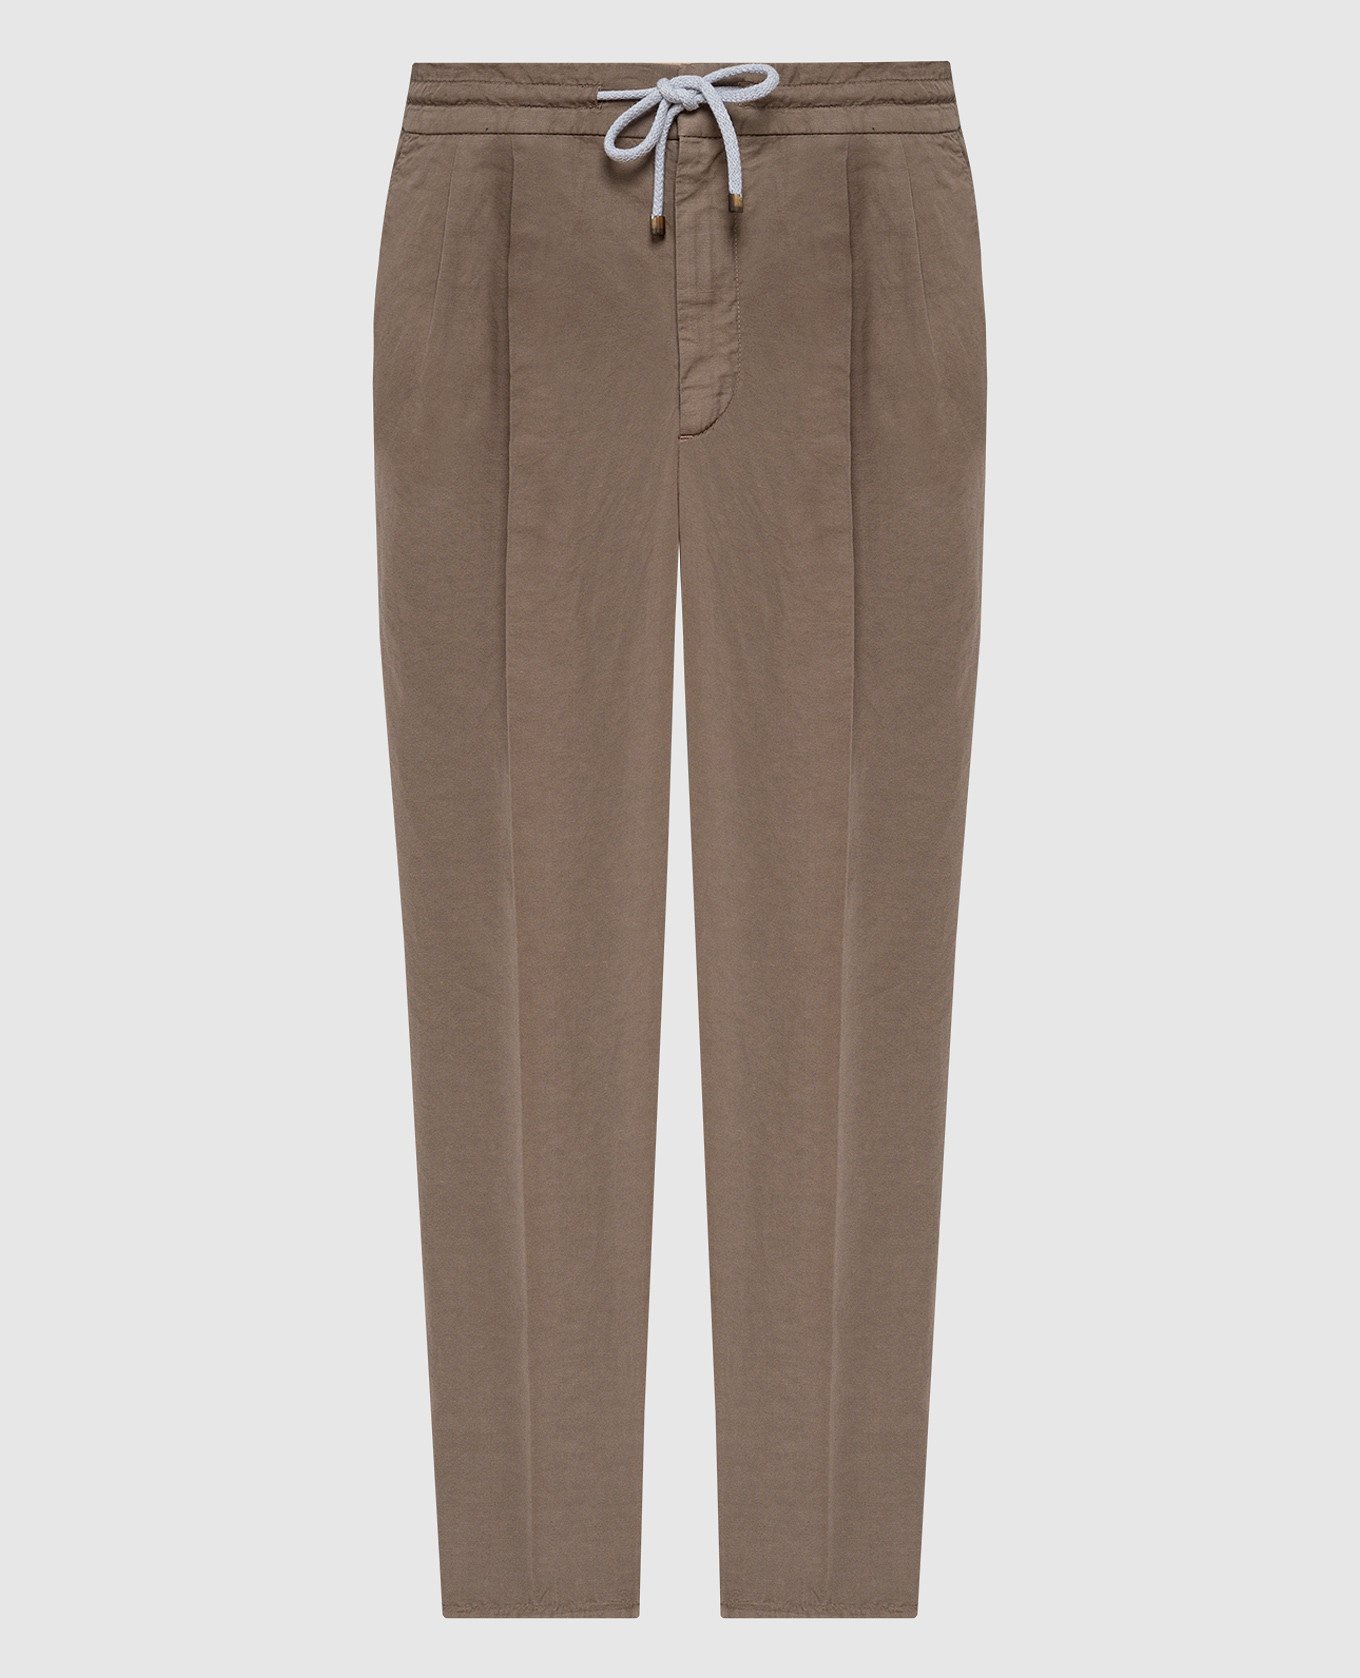 Brown pants with linen